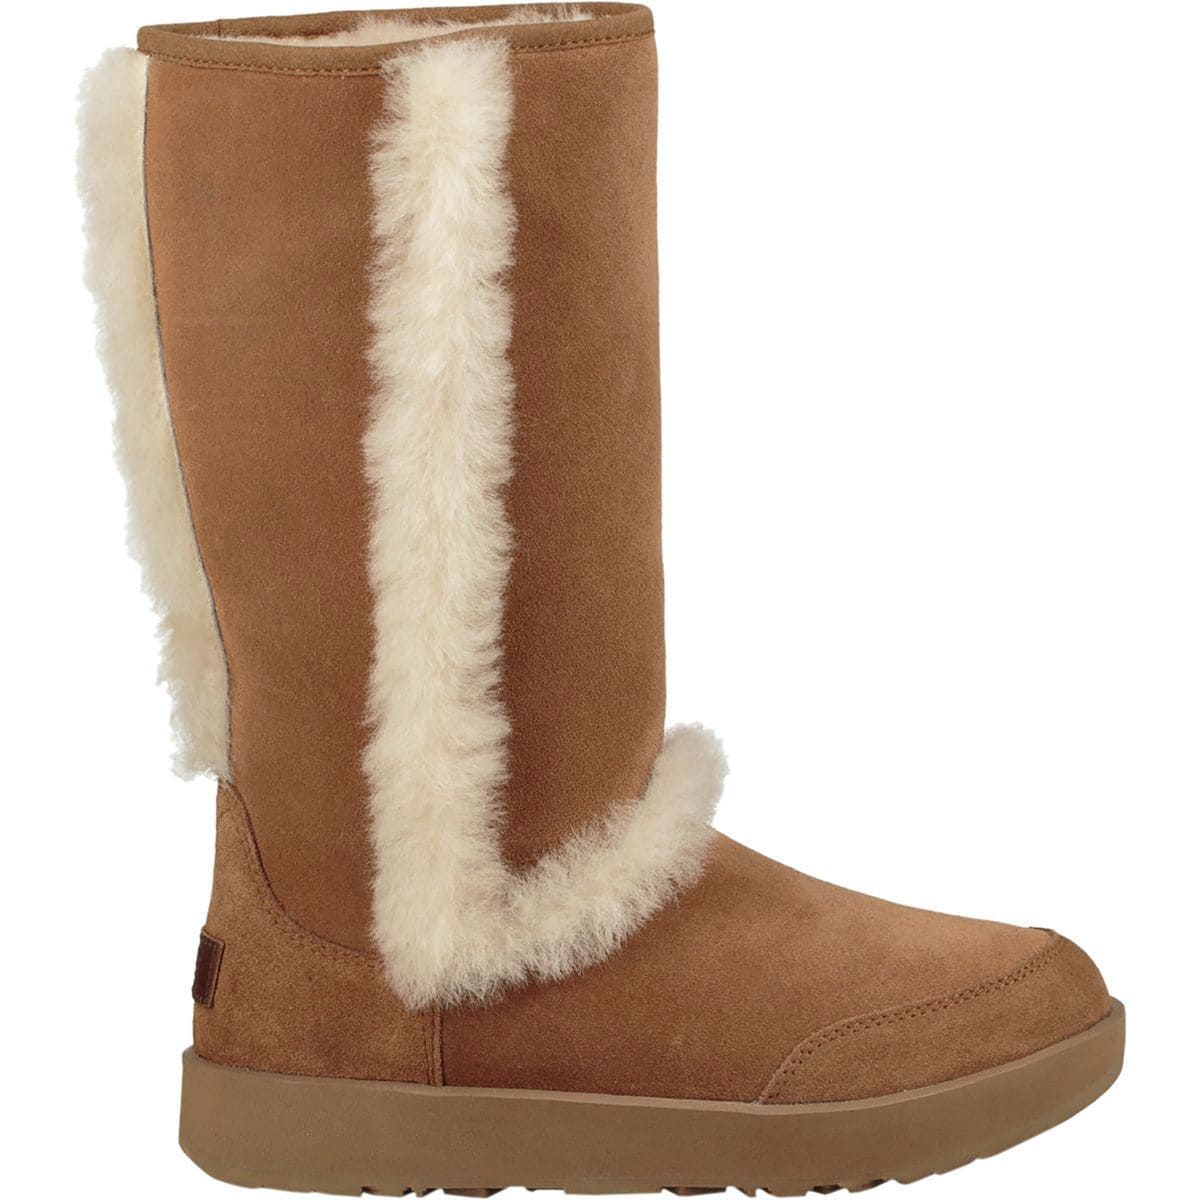 ugg boots with grip sole